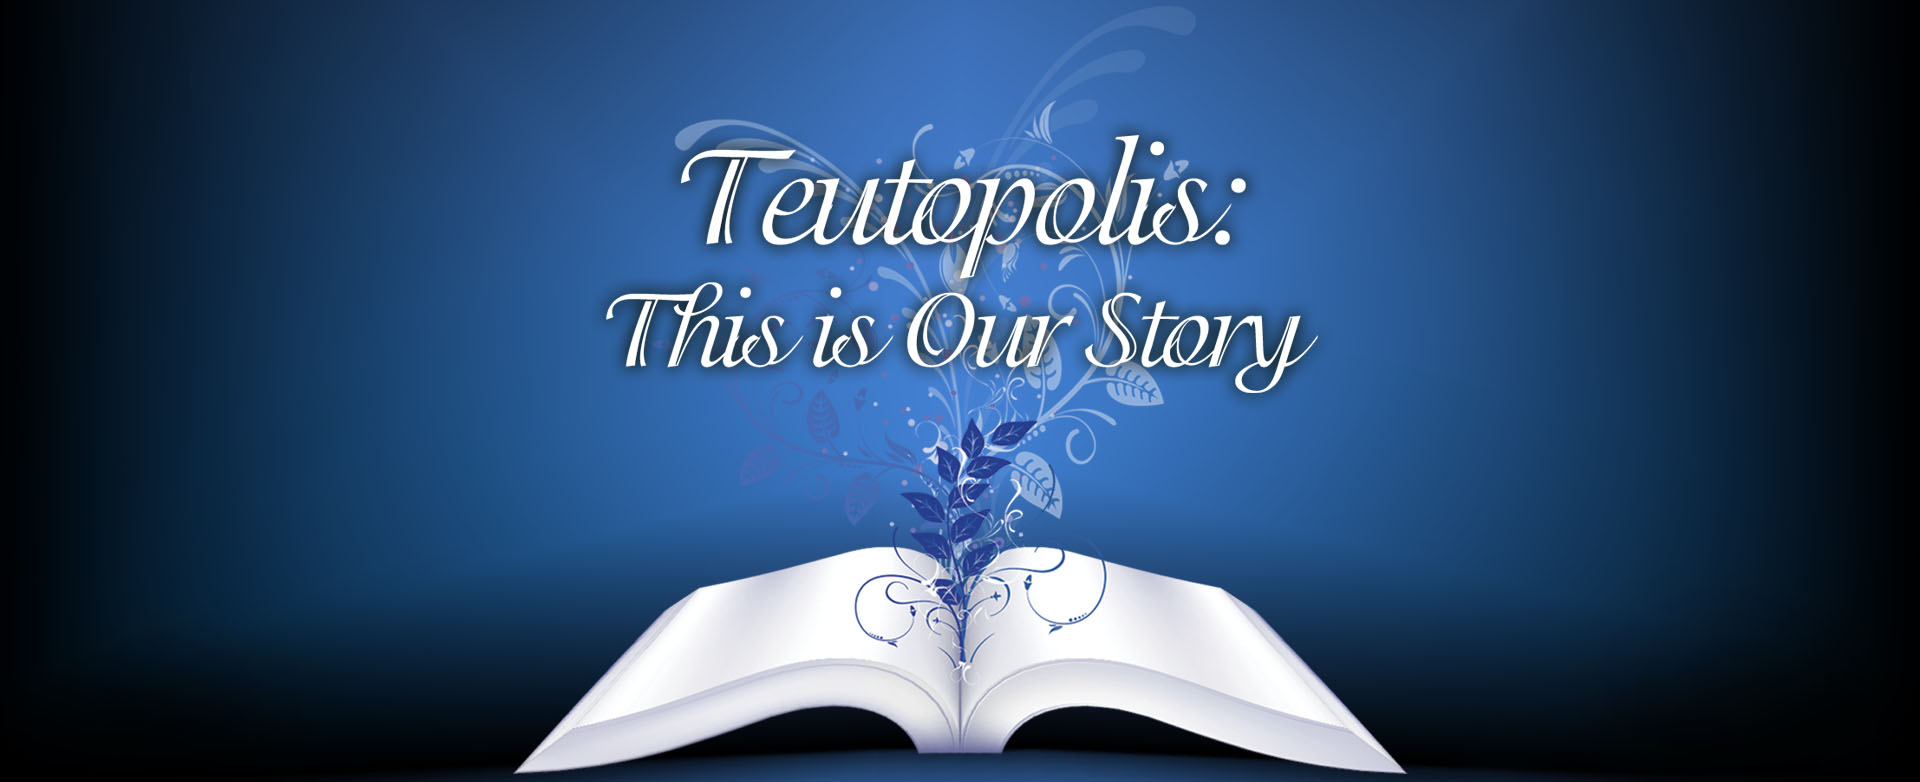 This is Our Story: Teutopolis